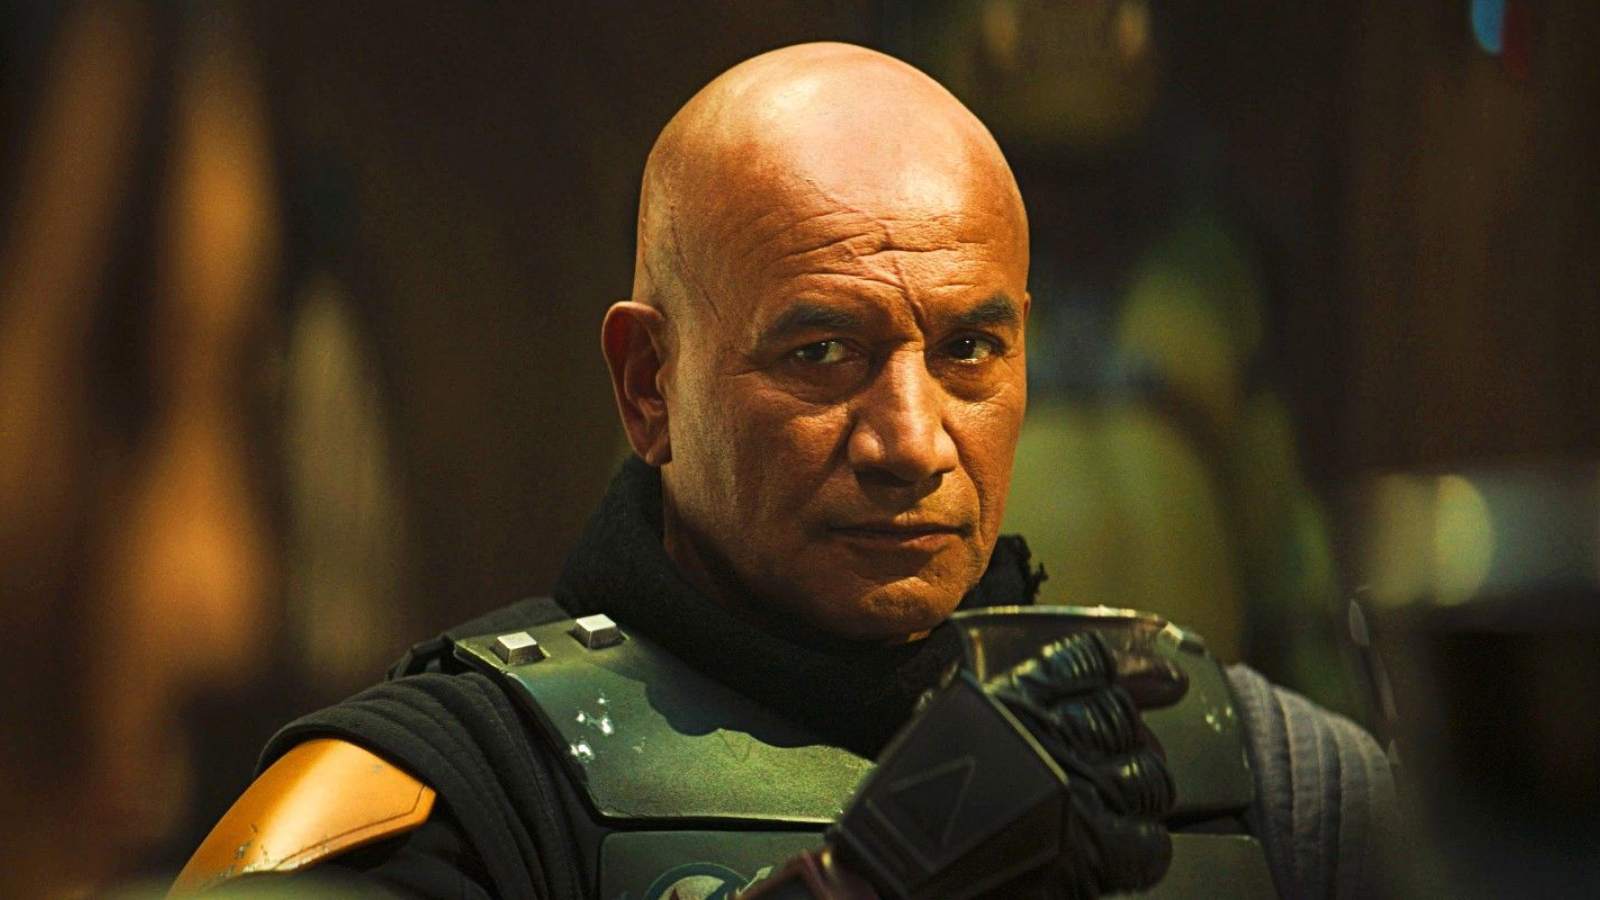 Temuera Morrison as Boba Fett in the show